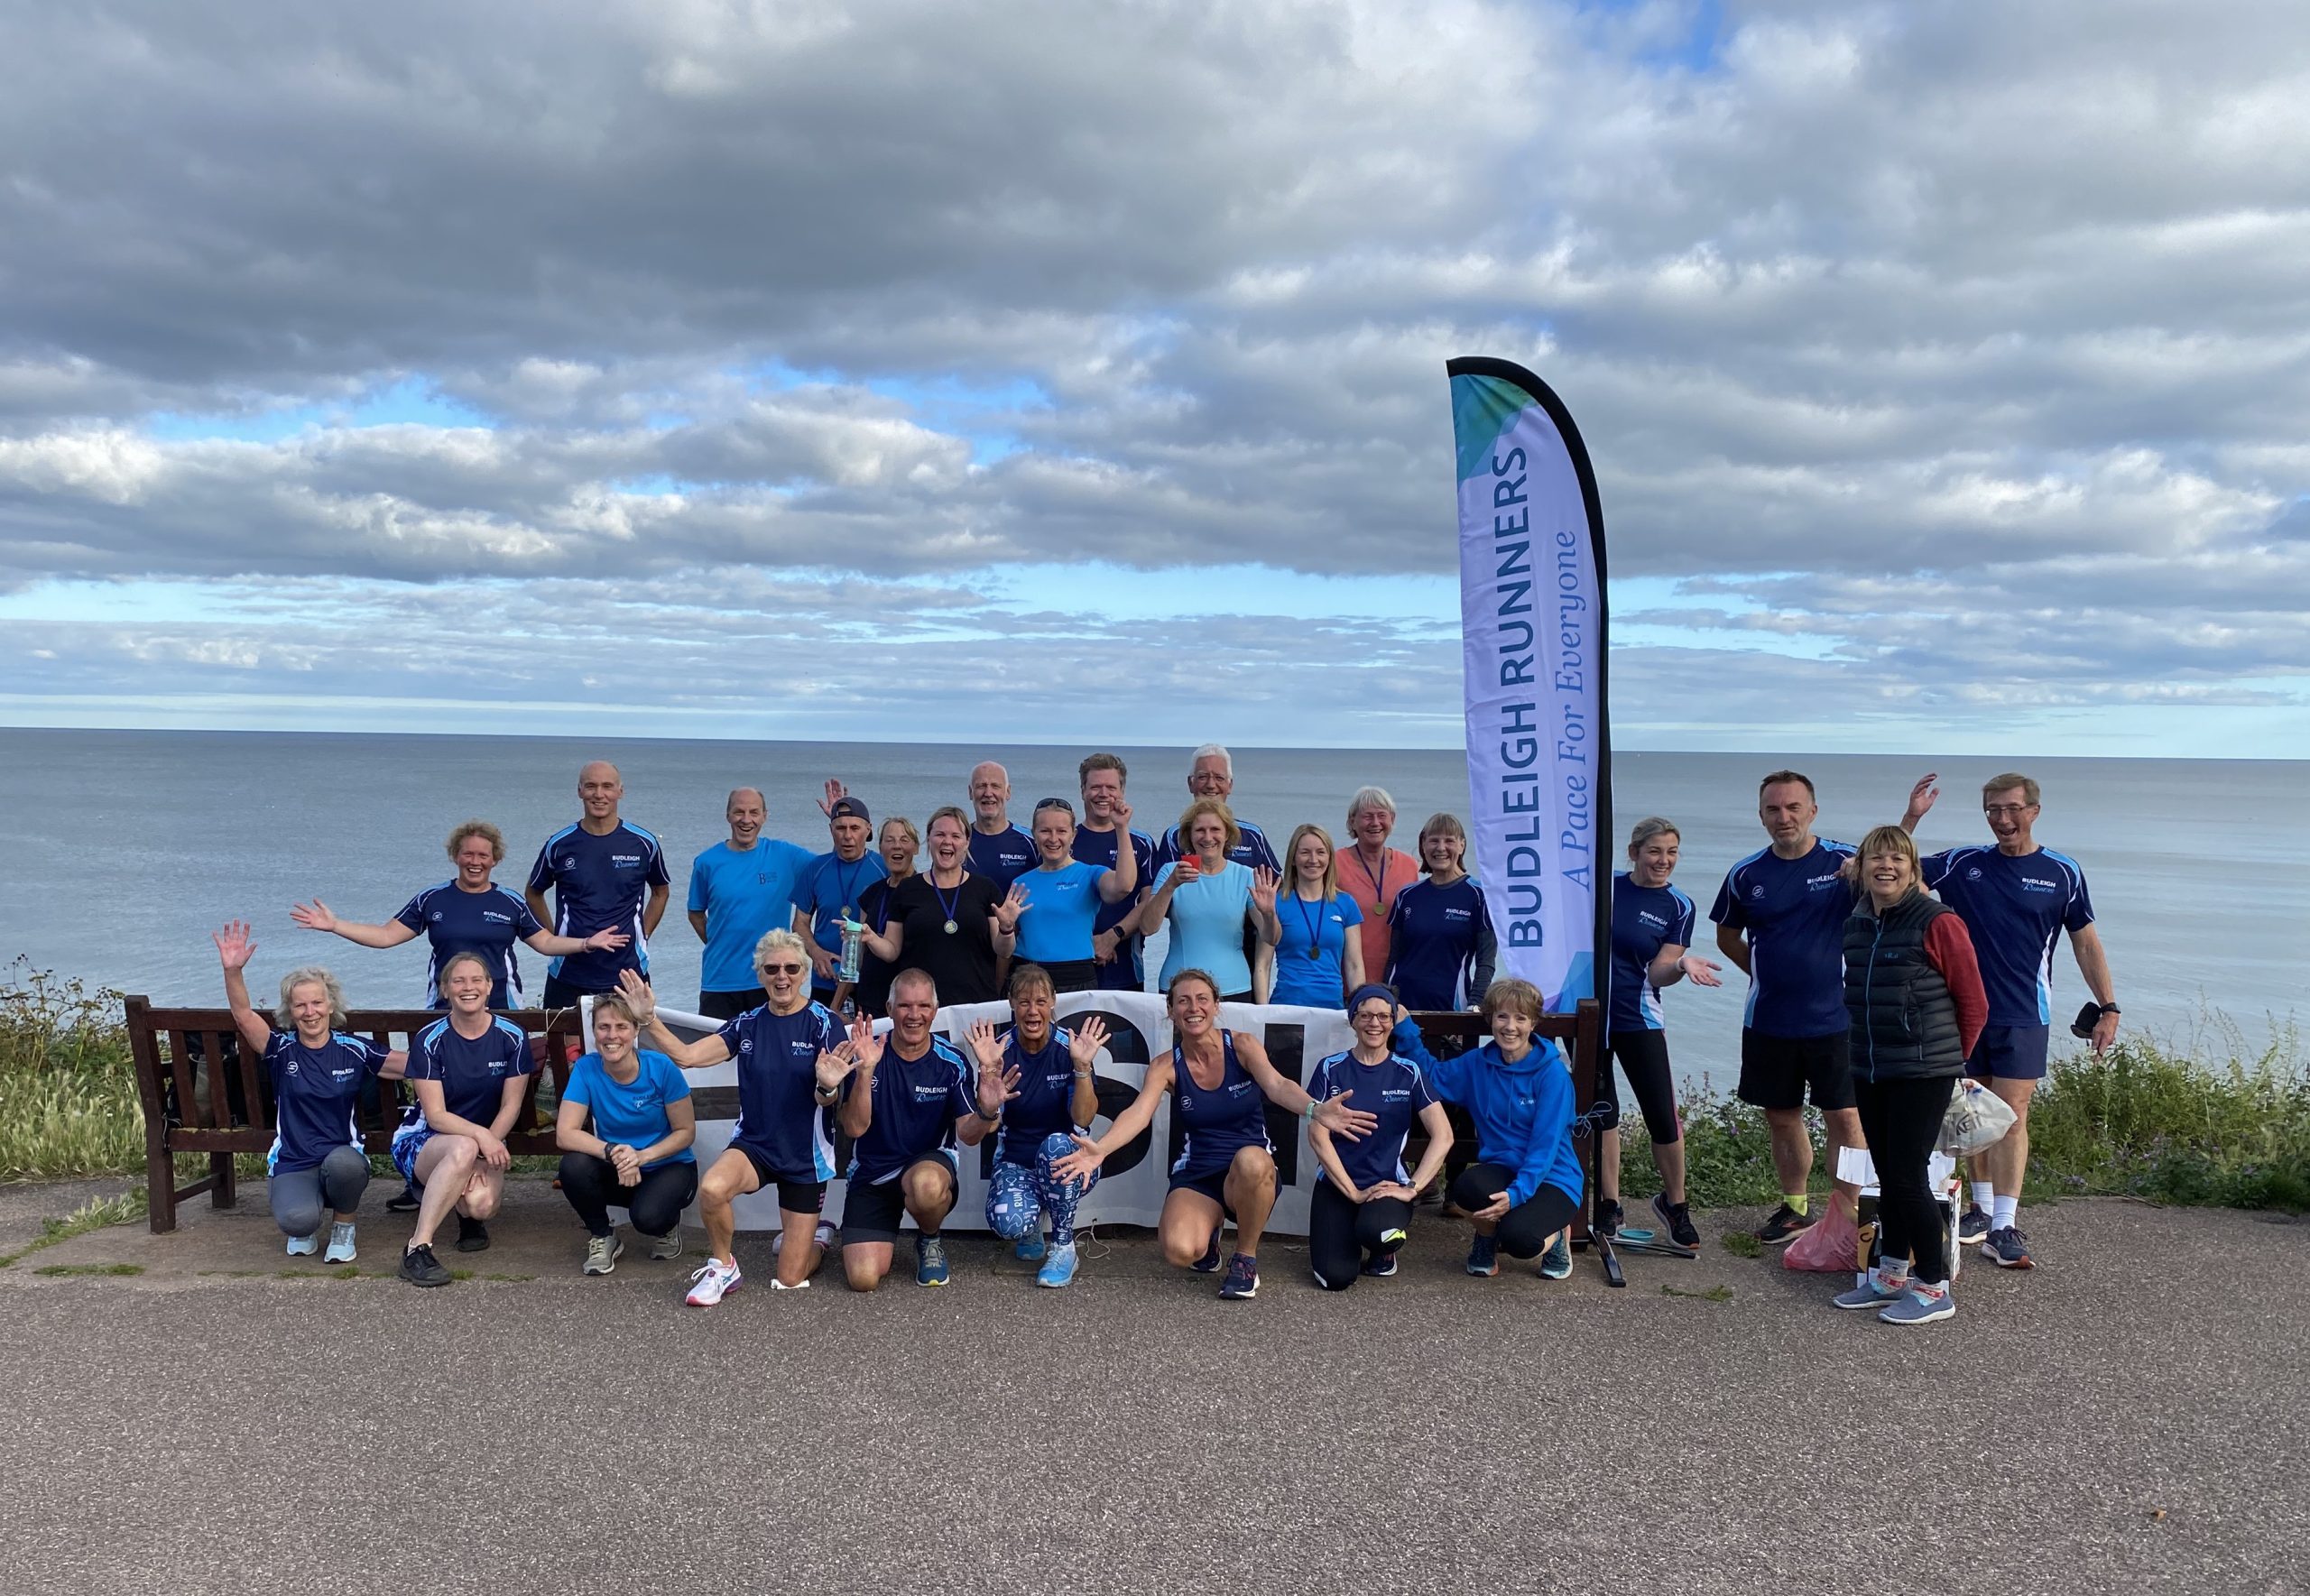 couch to 5k budleigh runners group